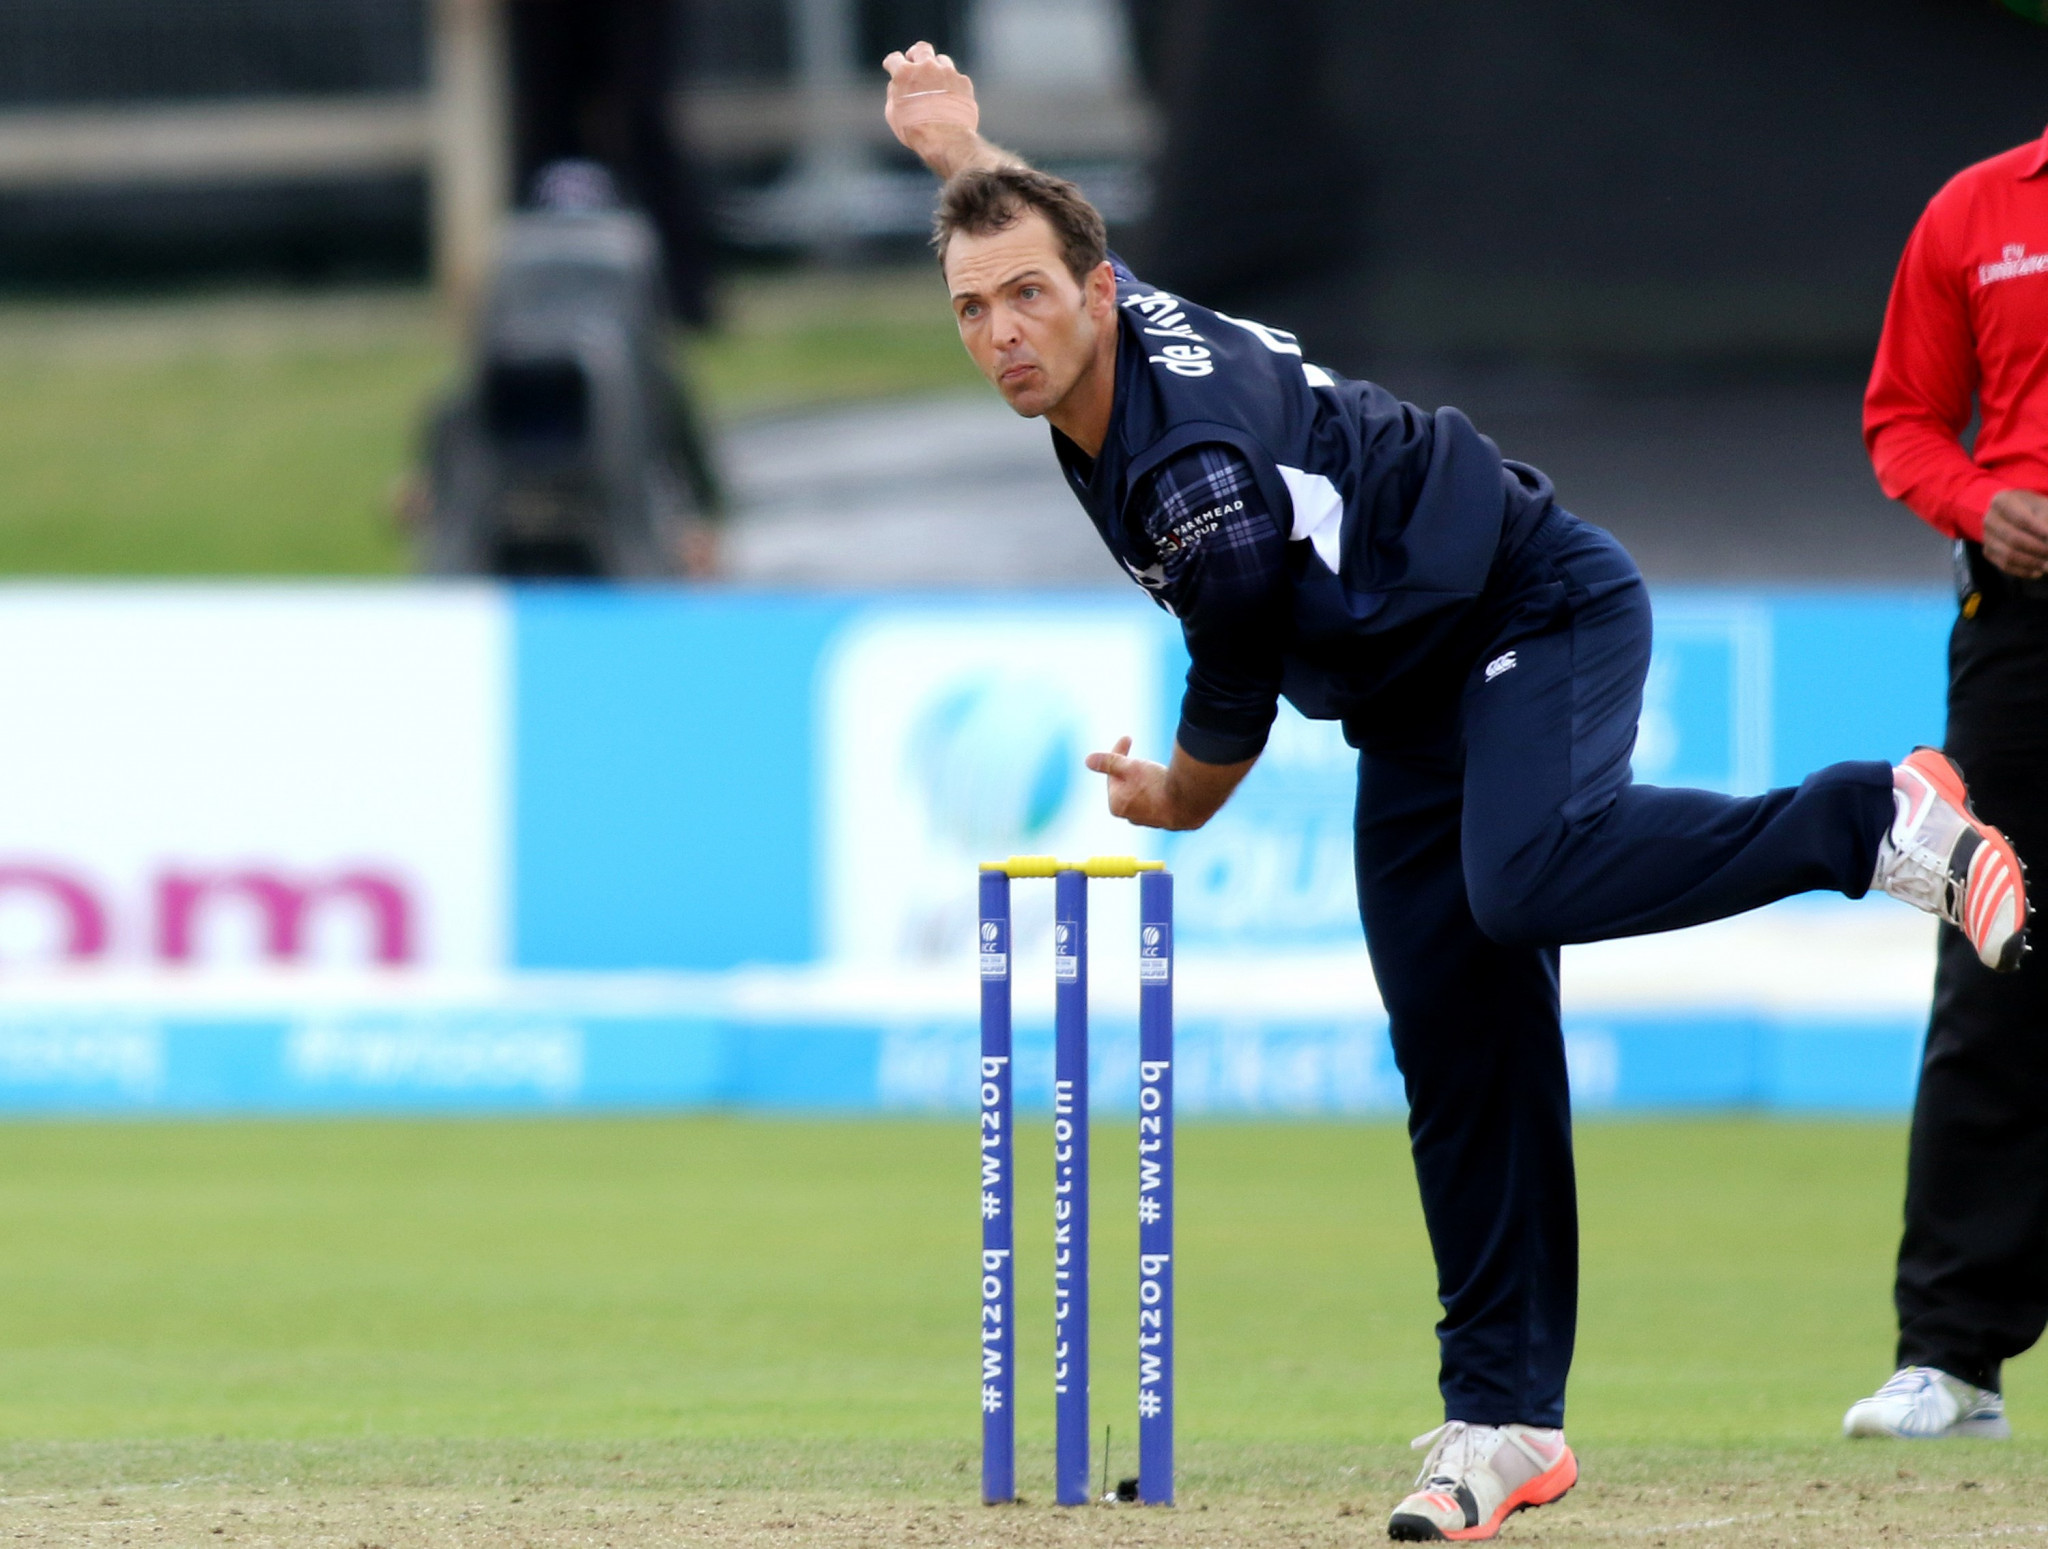 Con De Lange scored the winning runs in Scotland's maiden win over a full ICC member ©Getty Images